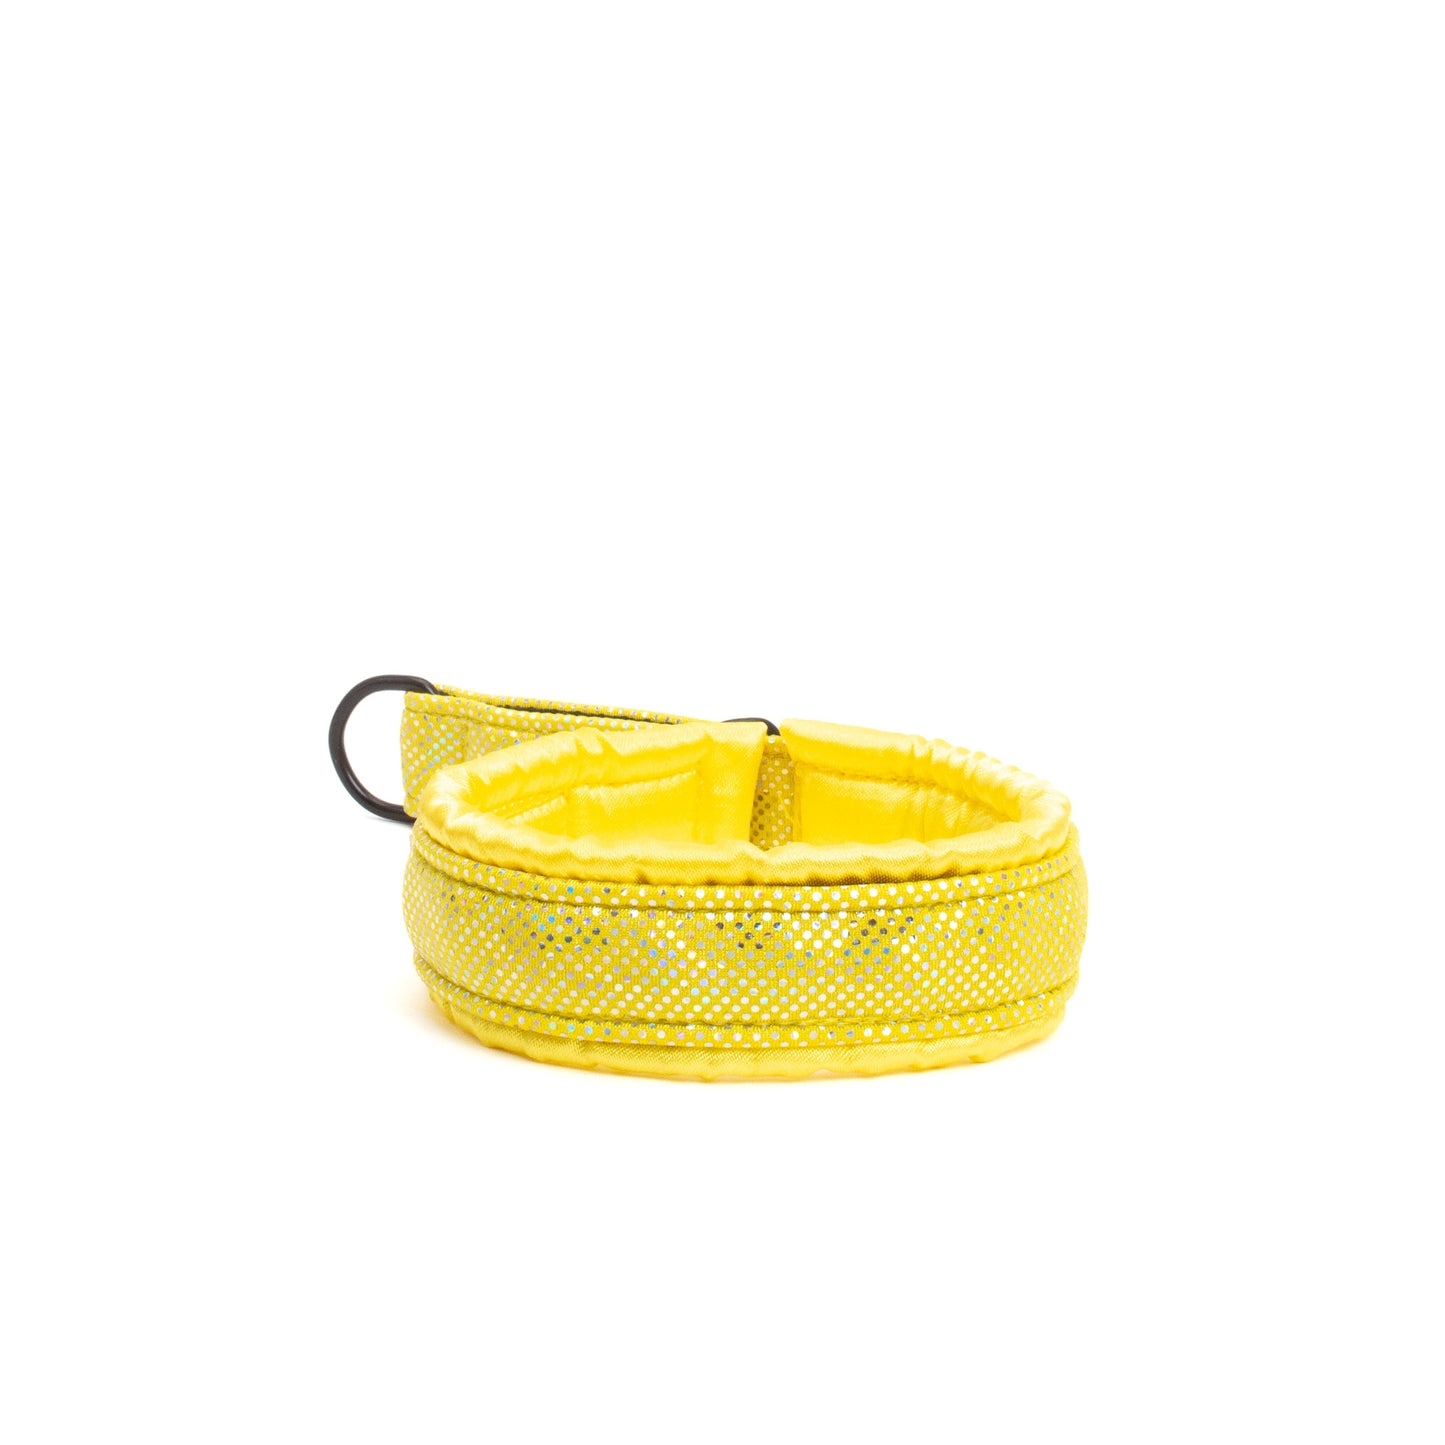 Small / Medium / Large Martingale Collar Poodle Supply Glossy Yellow